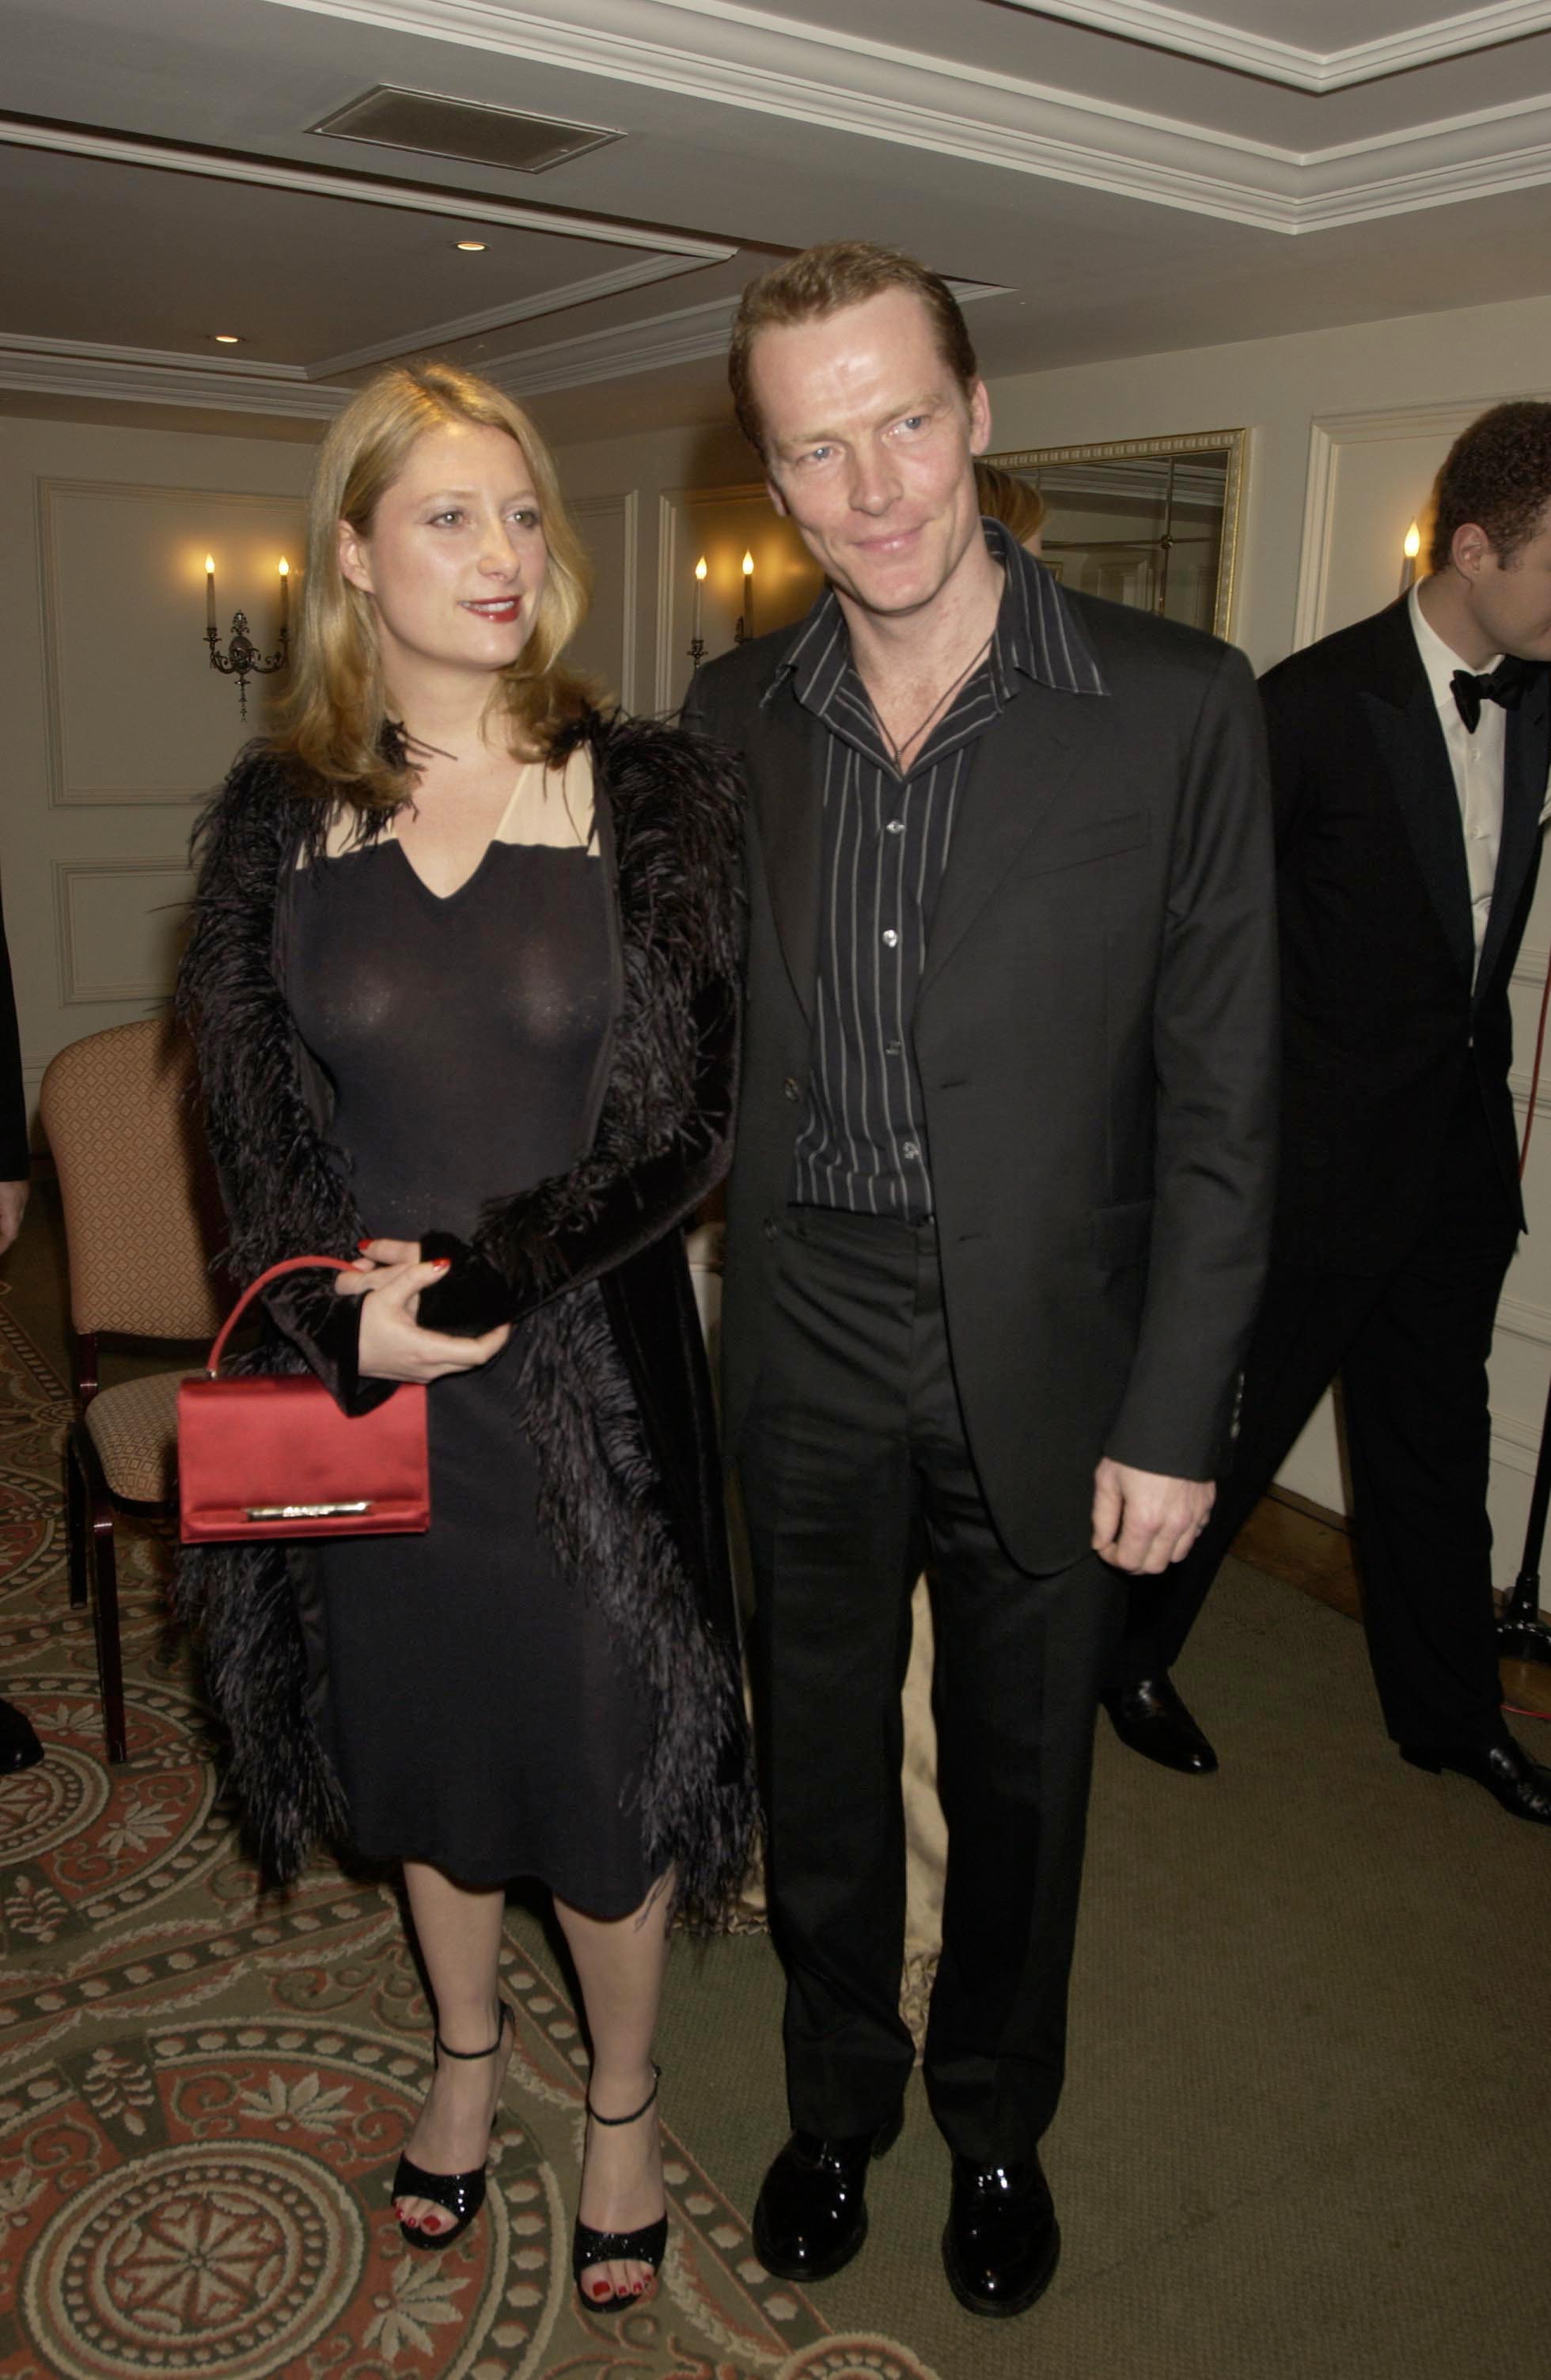 Susannah Harker and Iain Glen at the Evening Standard Film Awards on February 3, 2002, in London, England. | Source: Getty Images